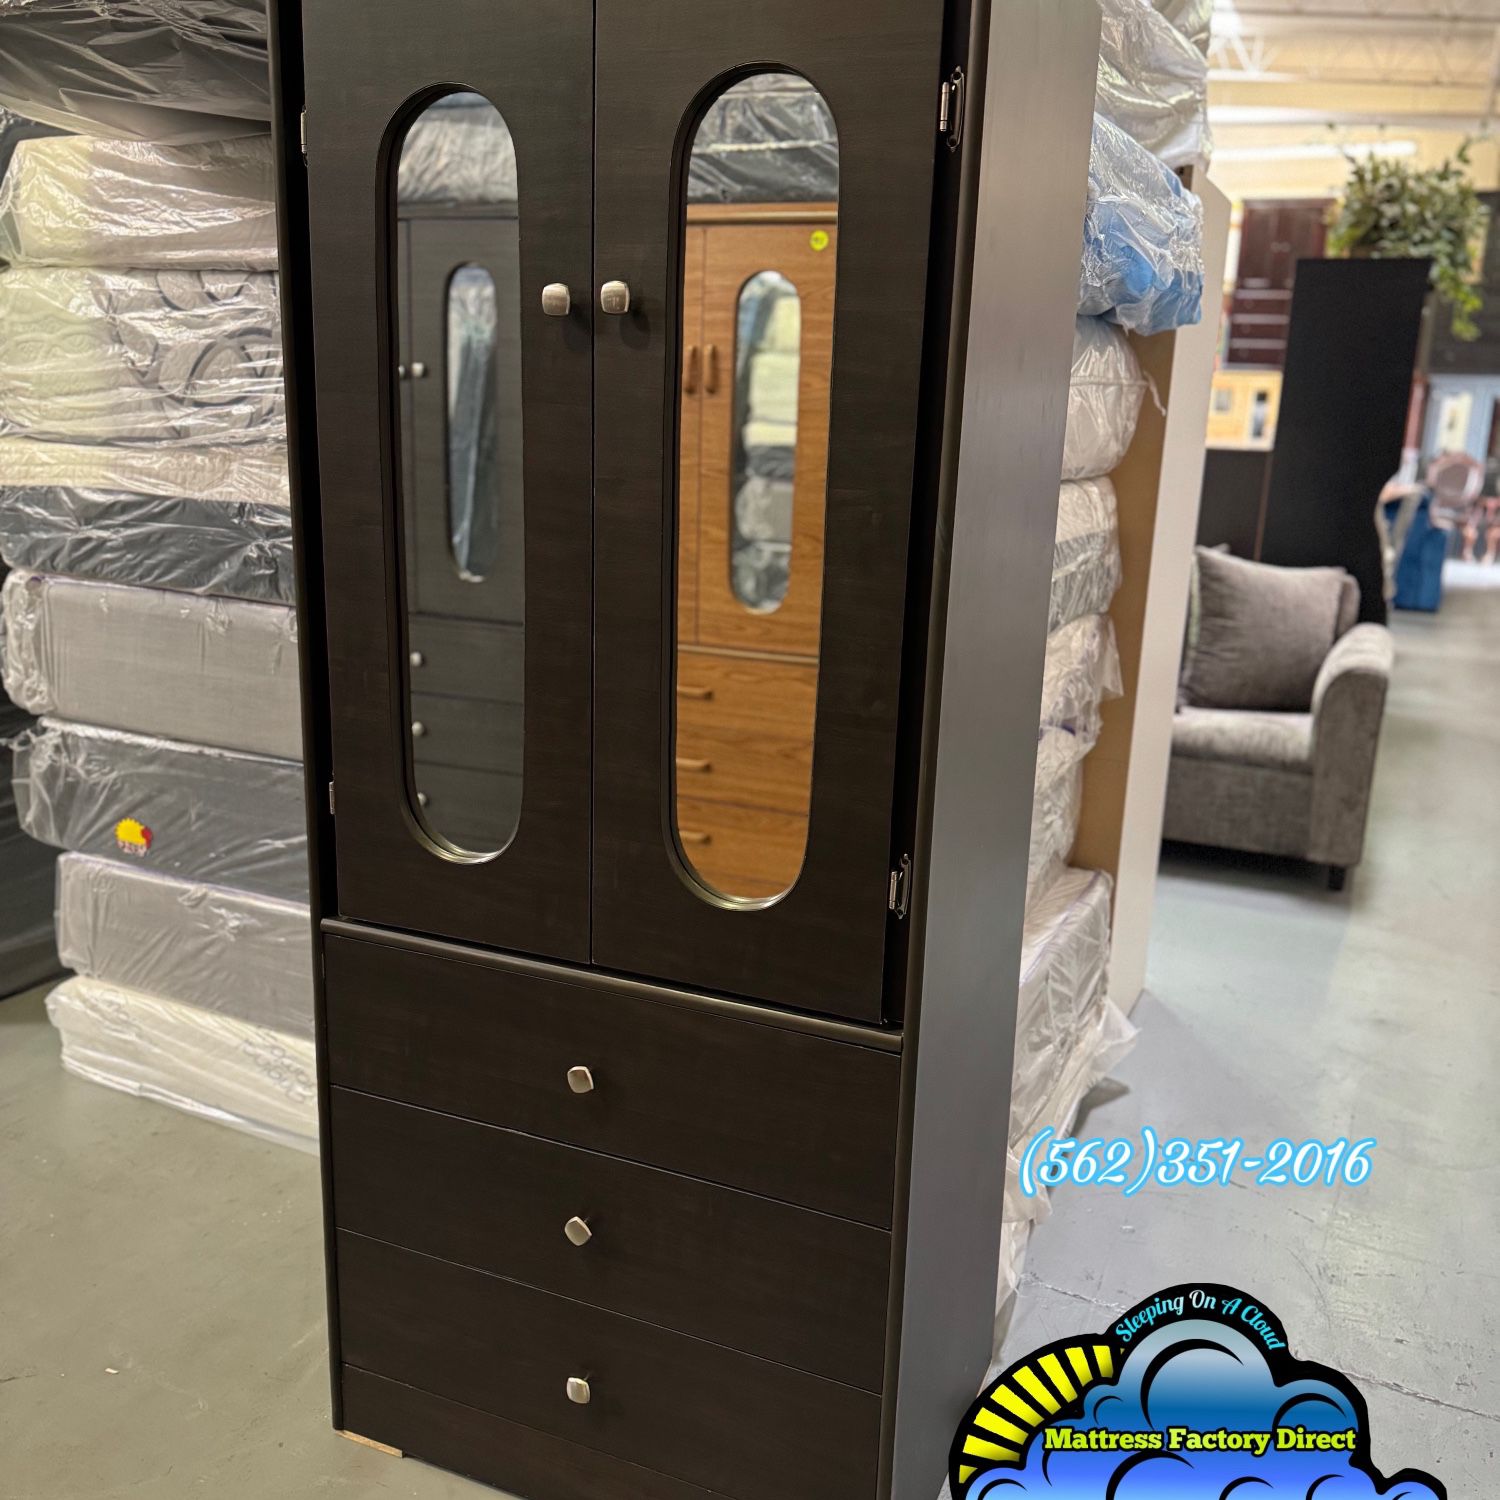 New Dark Brown Expresso Wood Tall Closet Wardrobe With Mirror And Three Drawers 